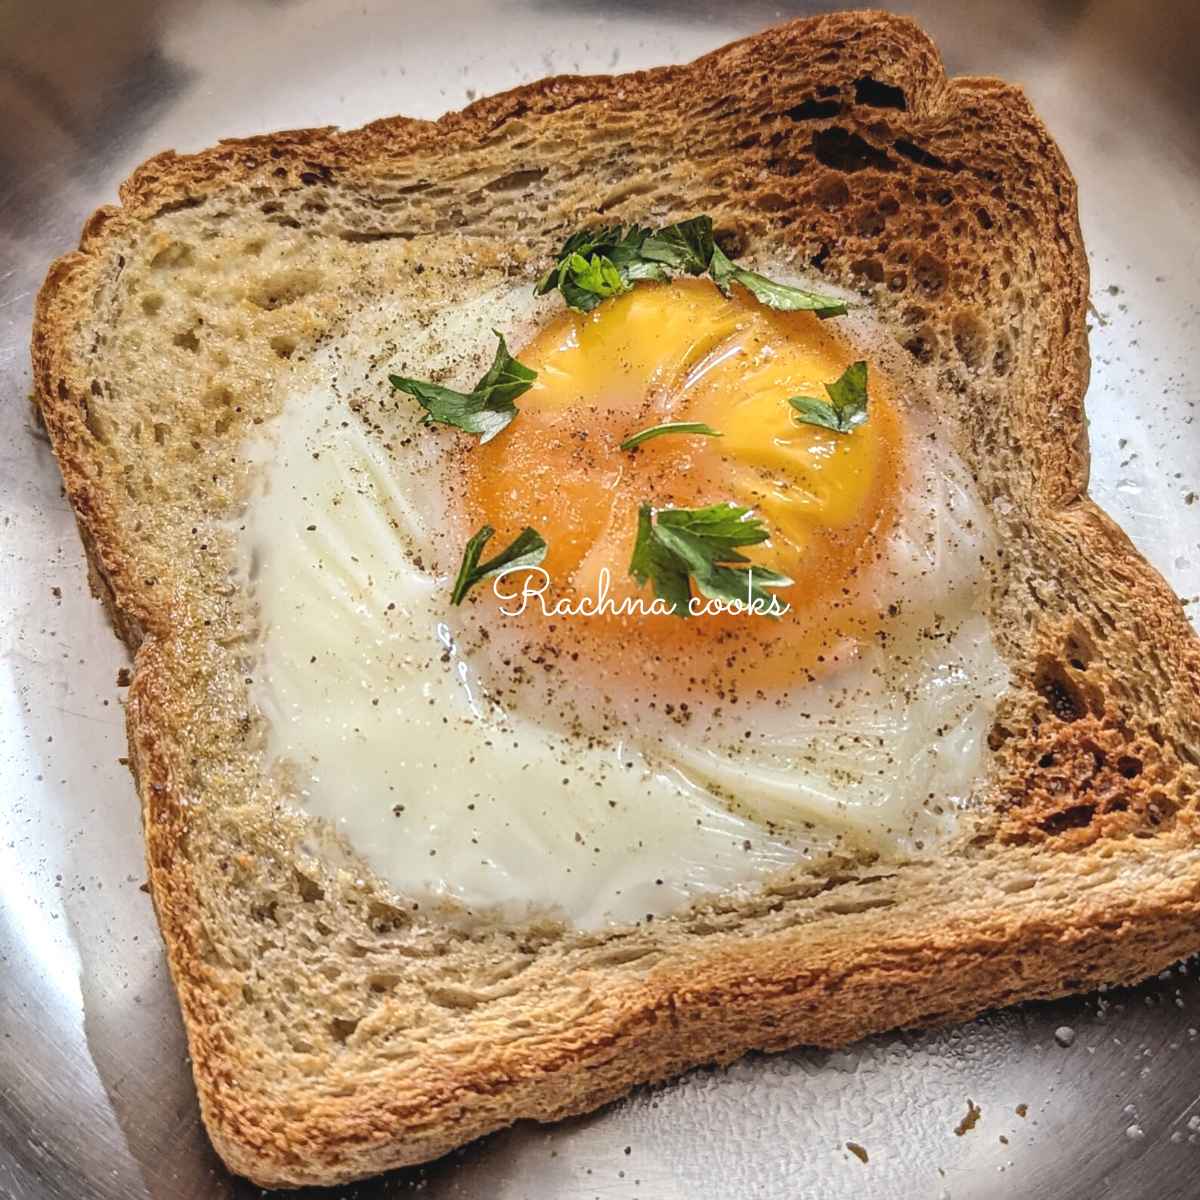 Toasted bread with egg in the hole in the center